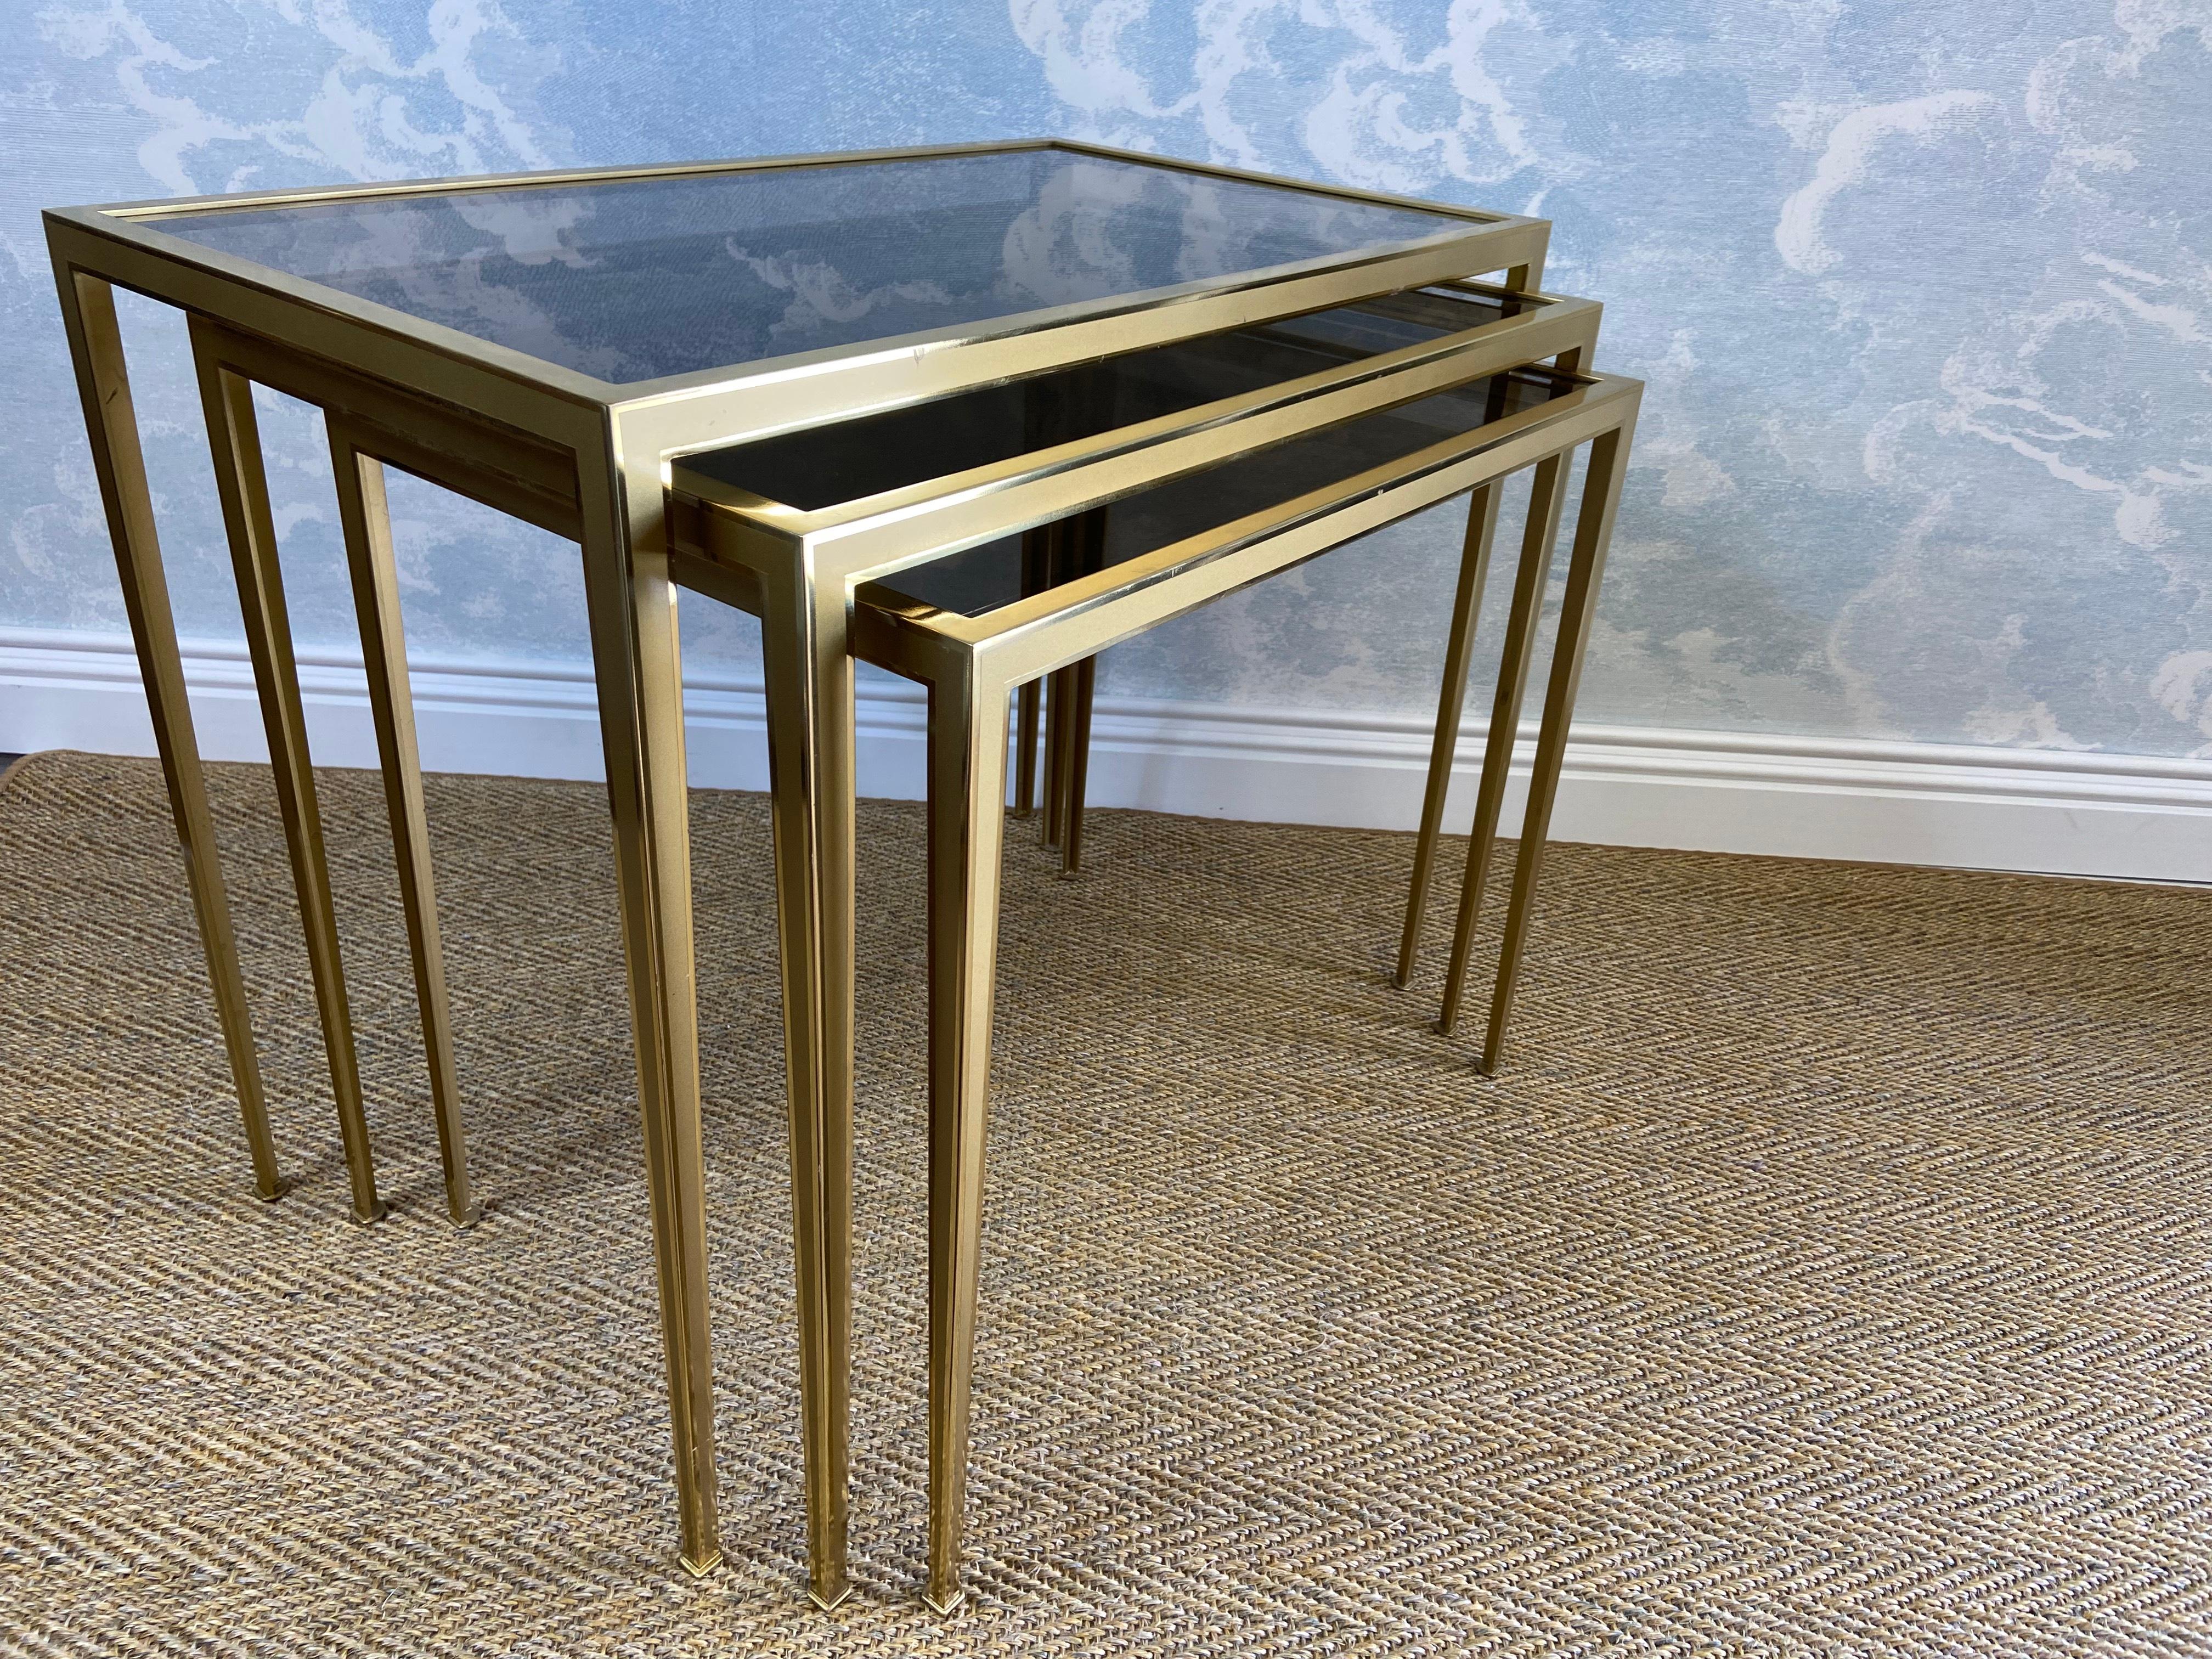 This elegant ensemble of three nesting tables was manufactured by Vereinigte Werkstätten in Munich in the 1960s and is in great condition.

Set on narrow ending legs, the bi-color brass frames have a polished and brushed finish and support the brown